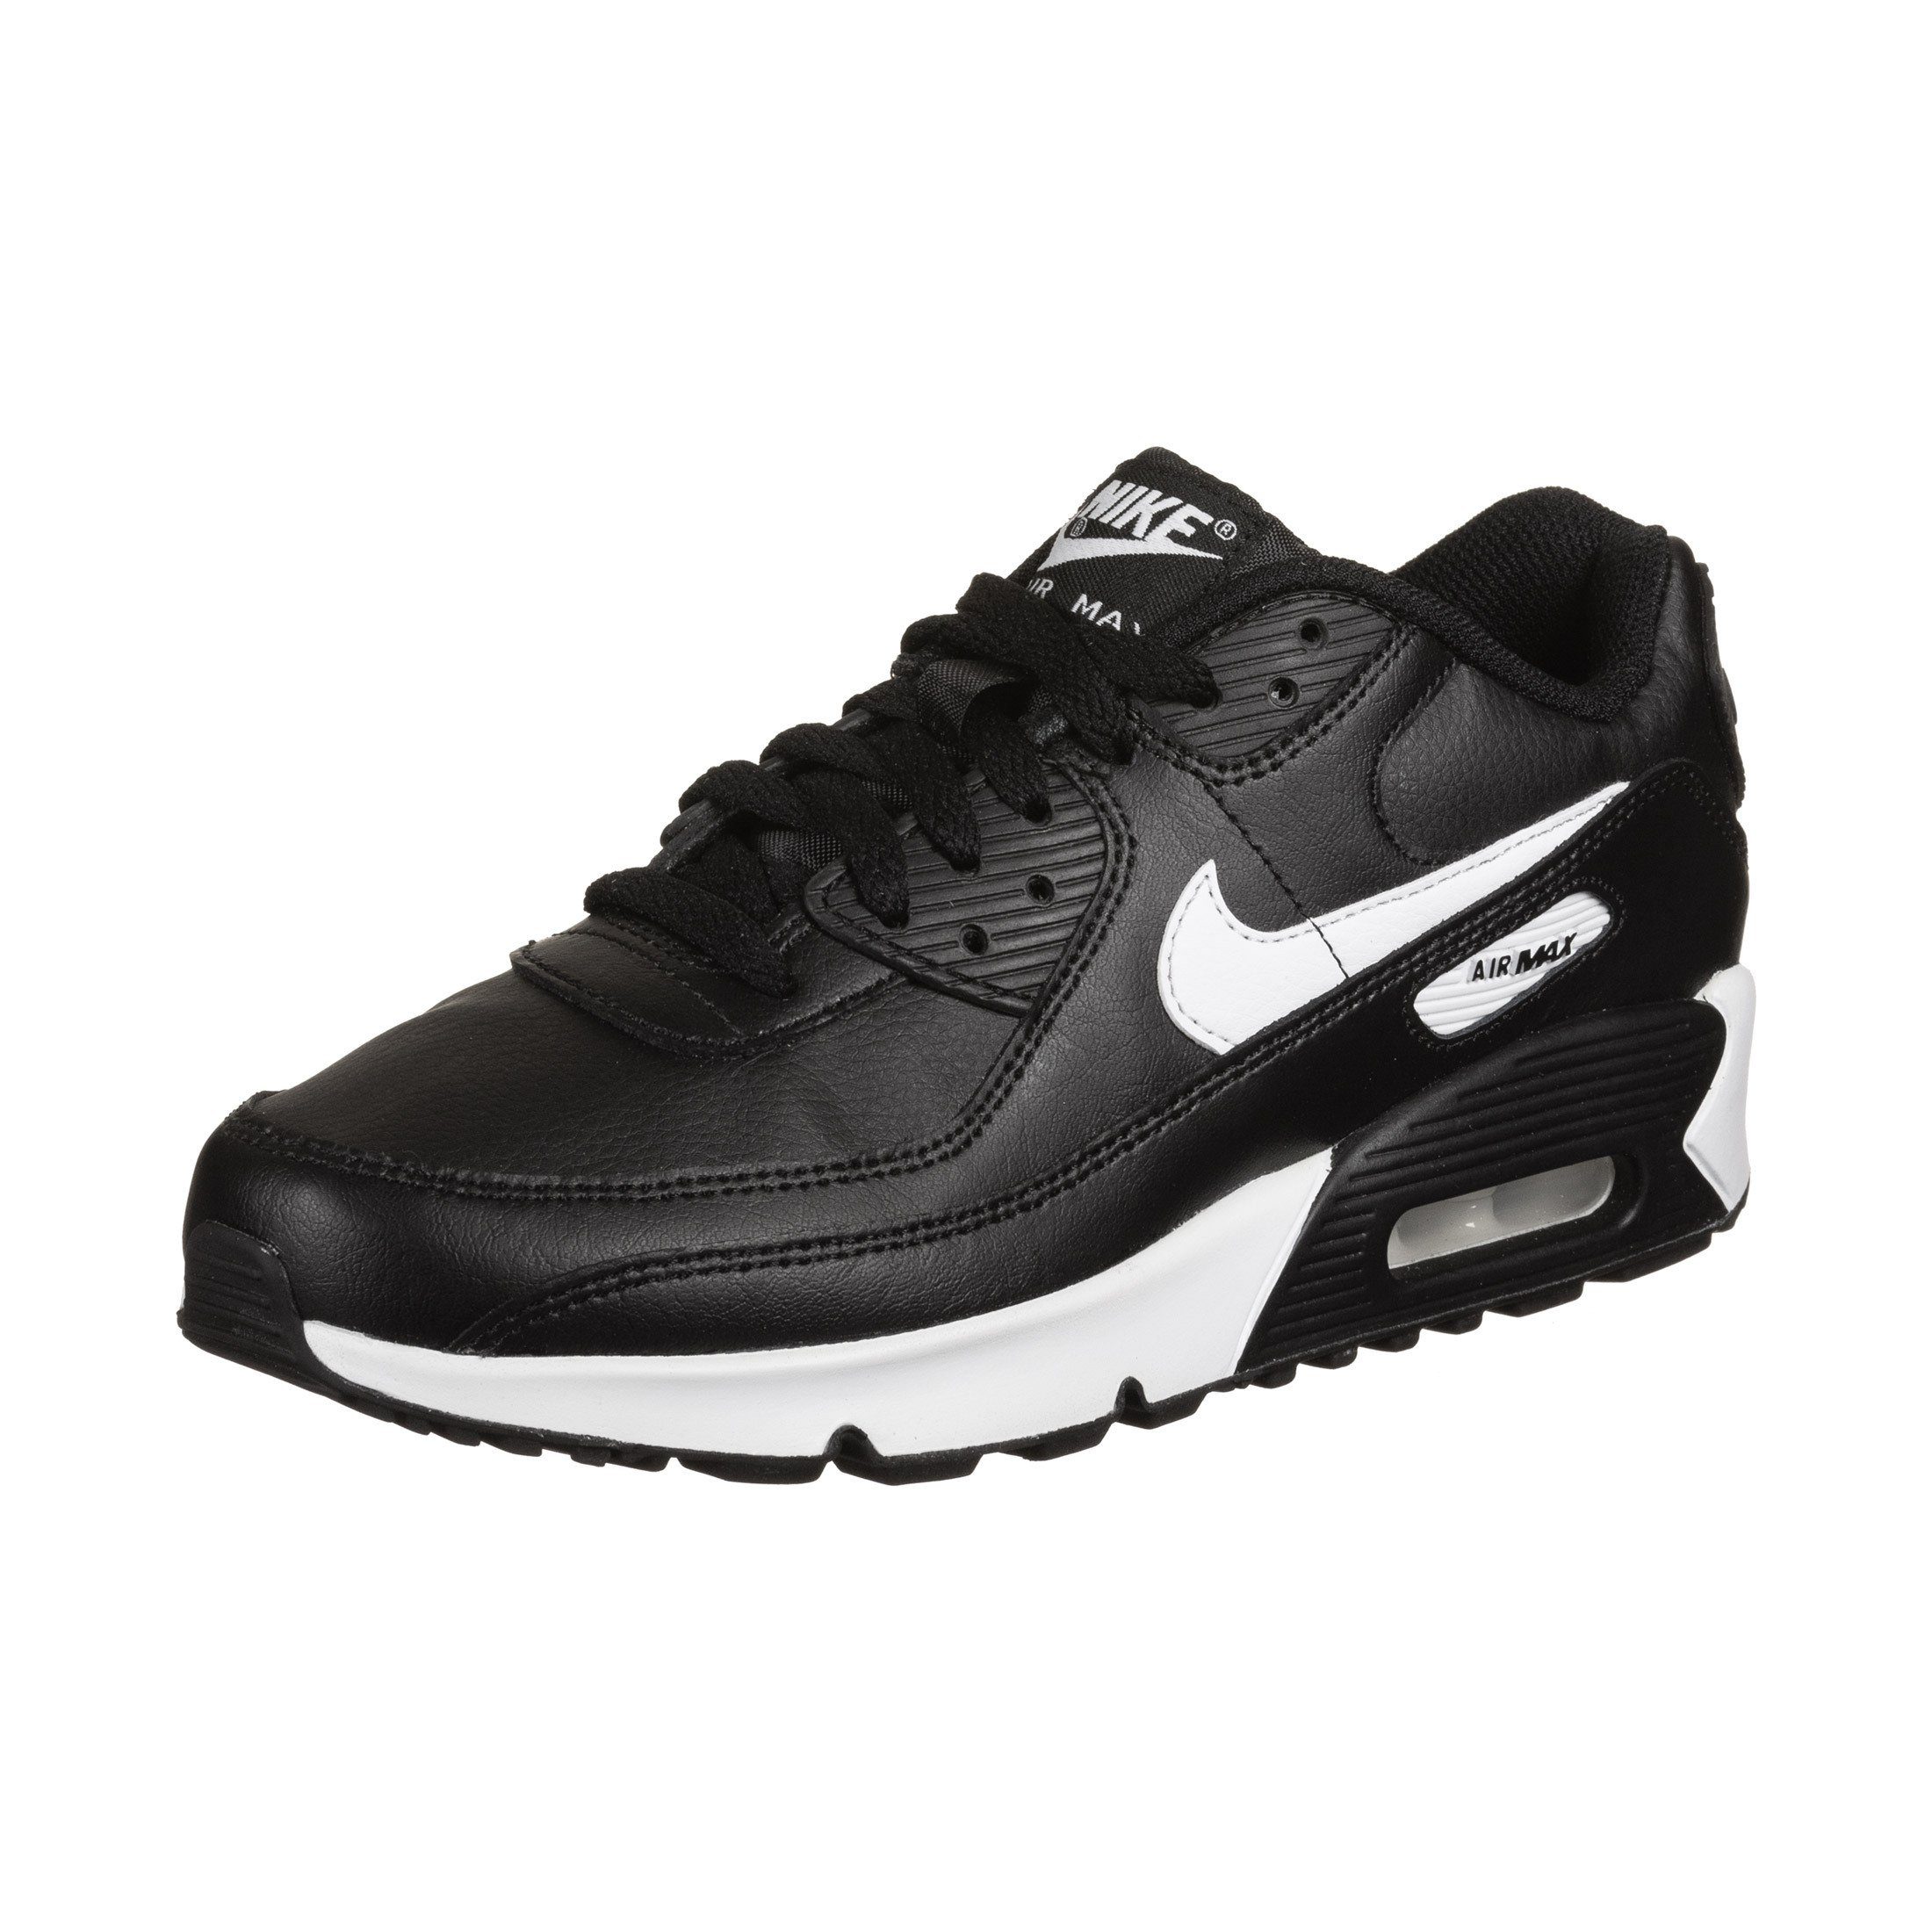 Nike »Air Max 90 Leather« Sneaker, Obermaterial mit robustem Leder online  kaufen | OTTO